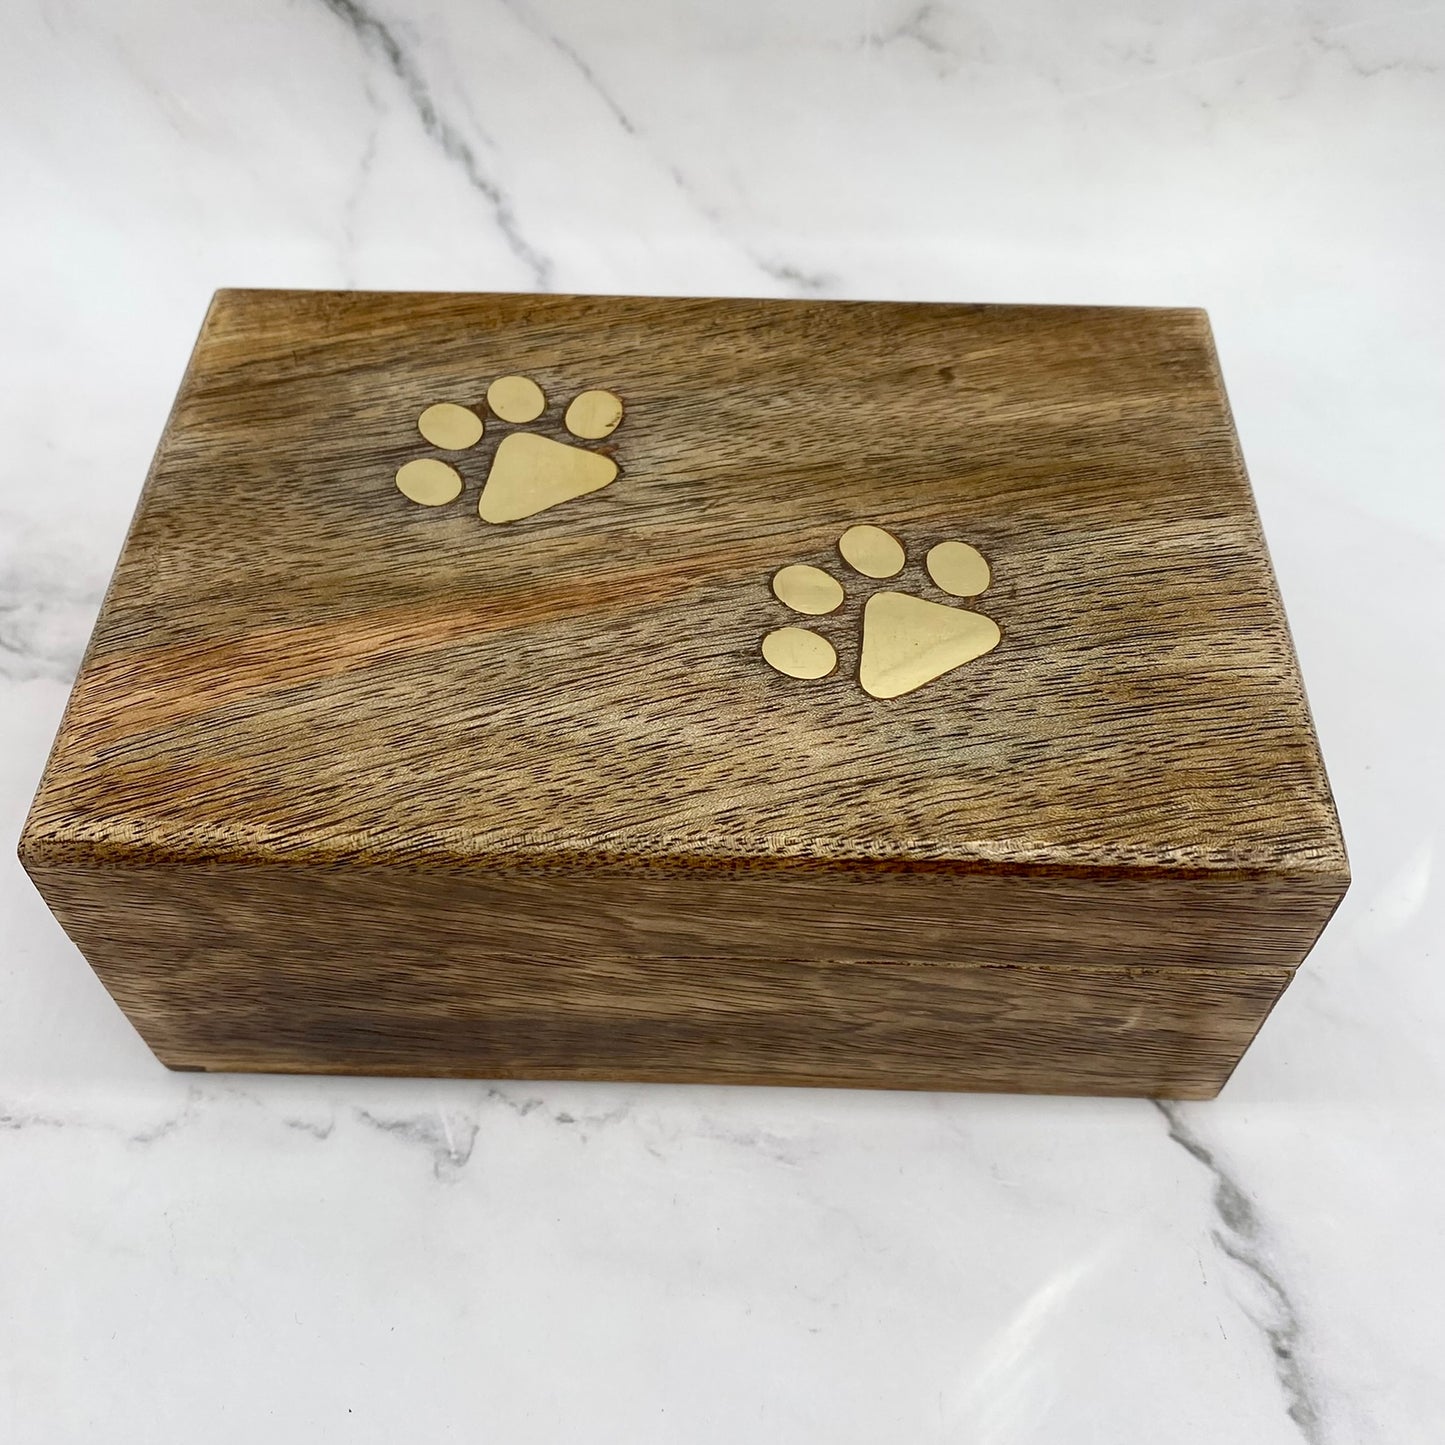 Handcarved Boxes, Wooden Storage Box, Paw Design Cute Jewelry Box, Tarot Boxes, Stash Boxes, Home Decor